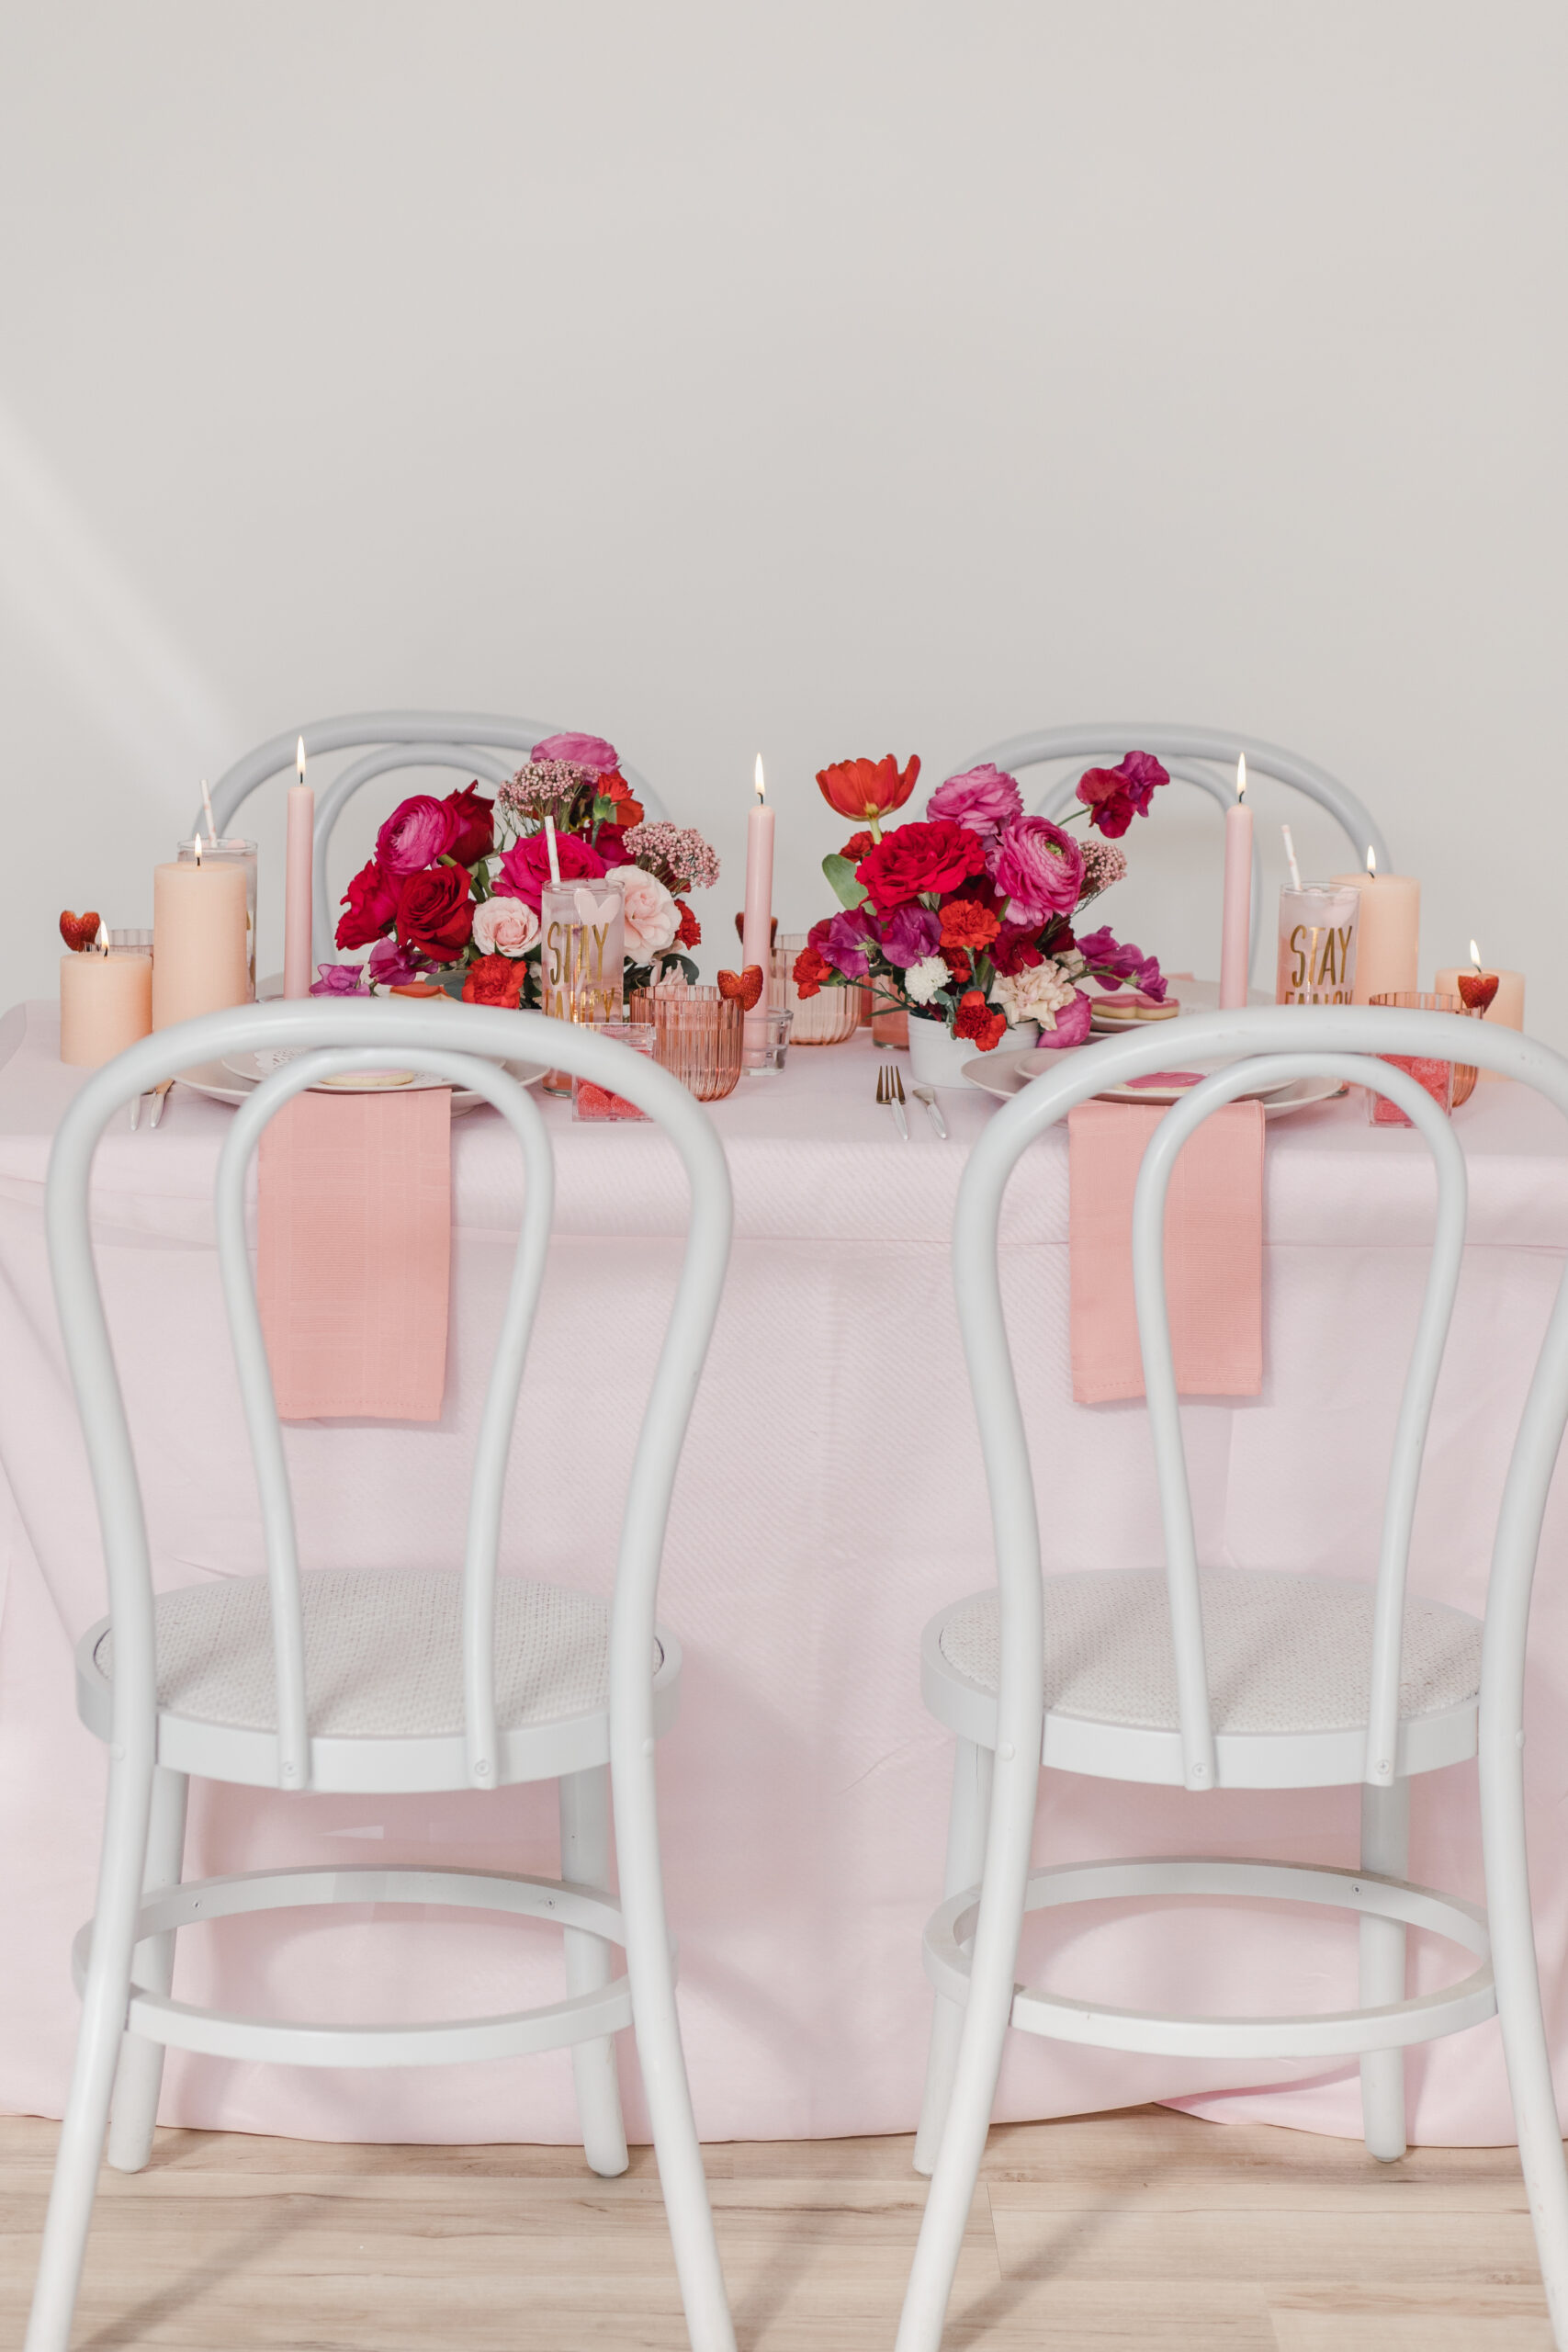 Image of white bentwood chair rentals